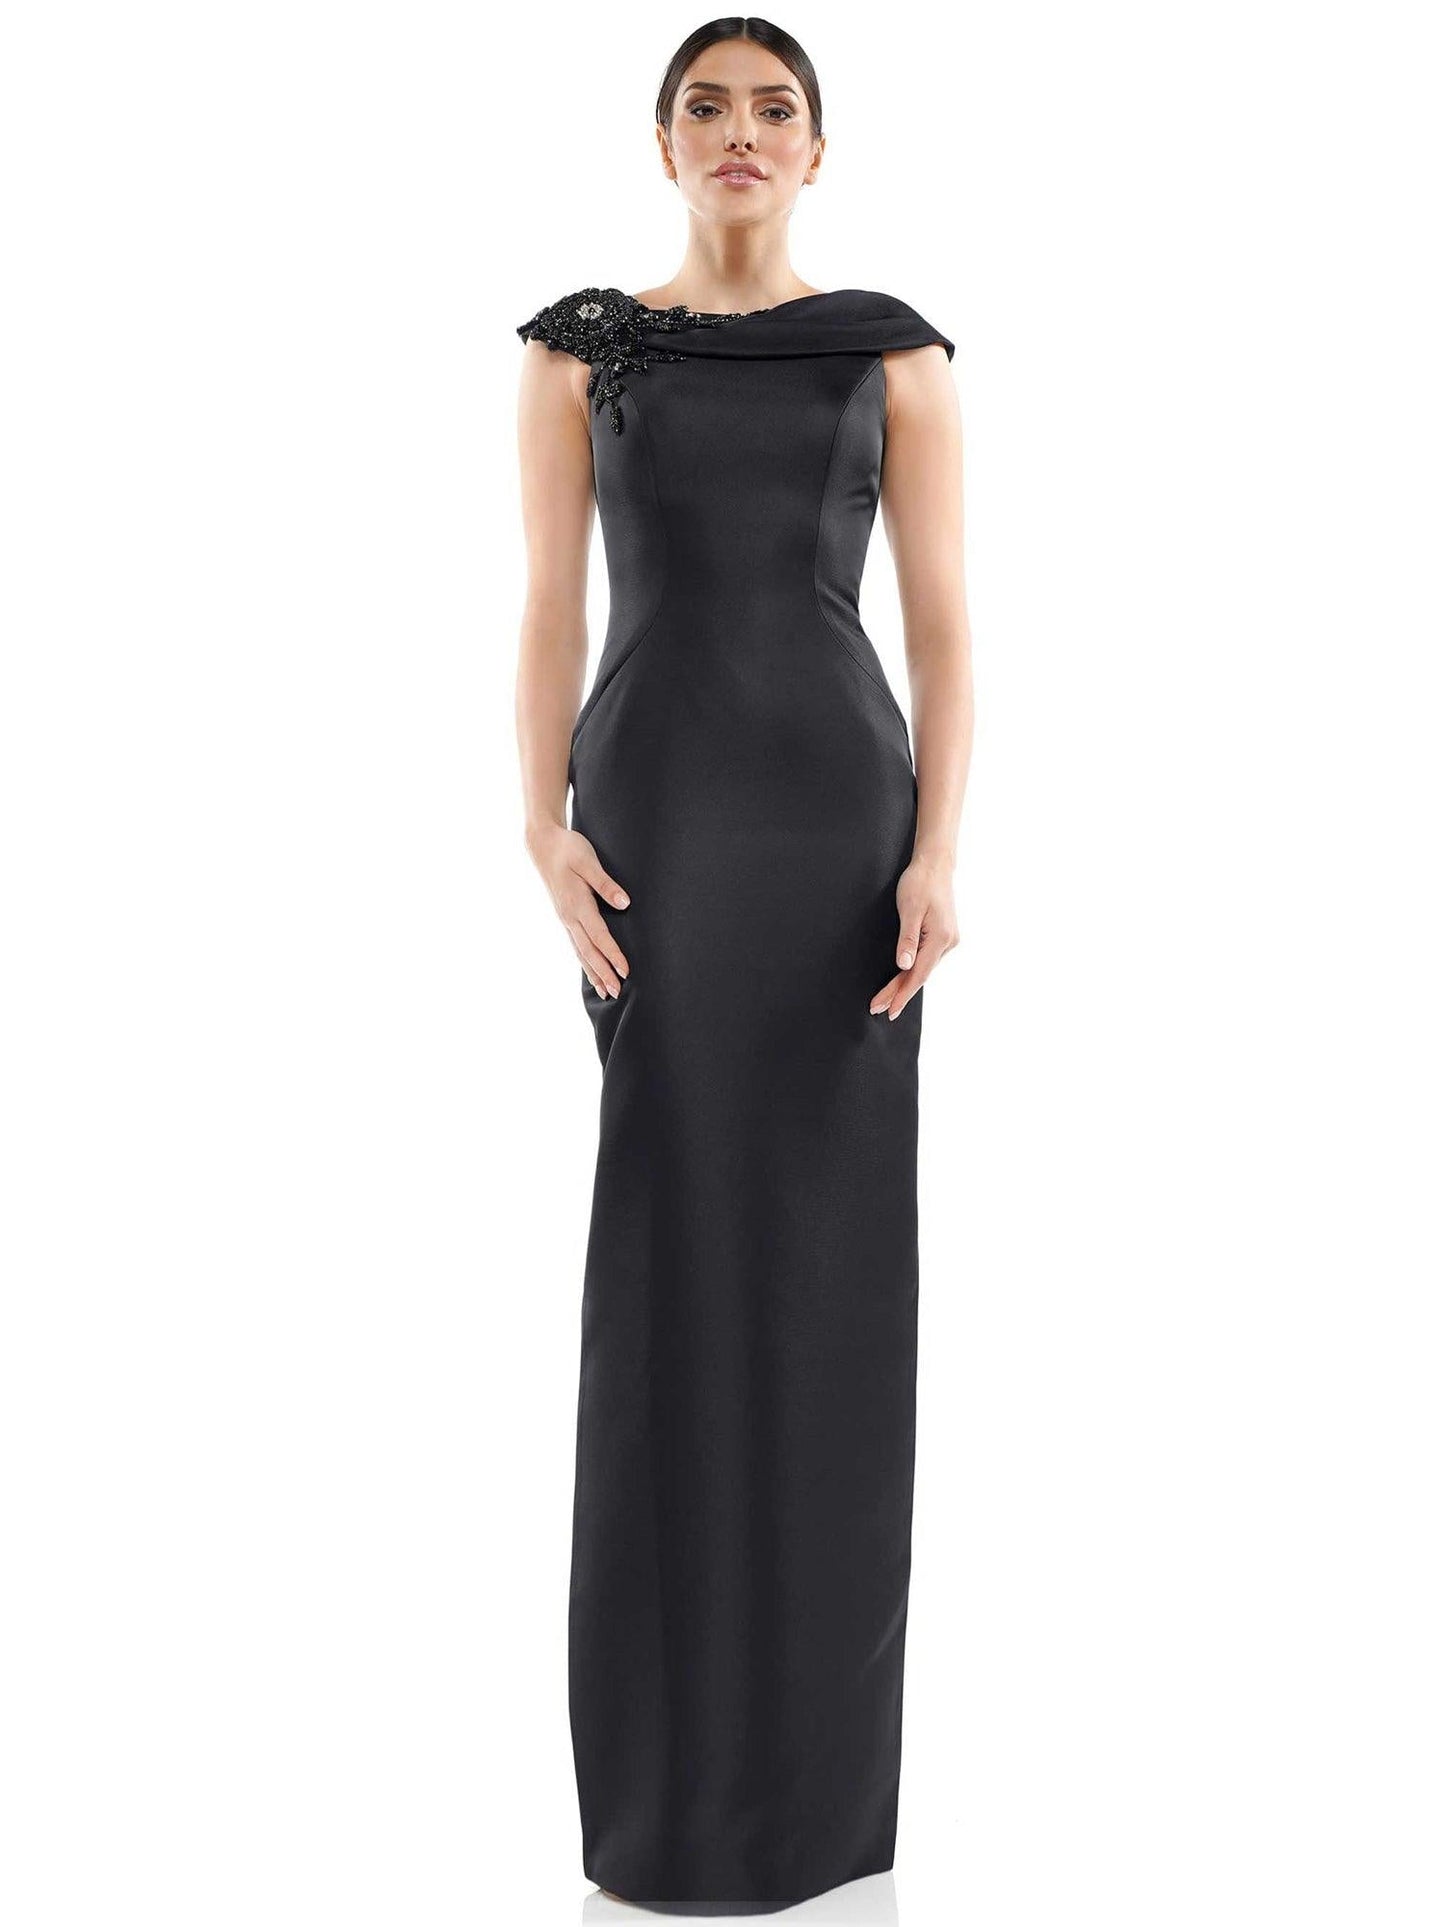 Marsoni Mother of the Bride Formal Long  Dress 1049 - The Dress Outlet